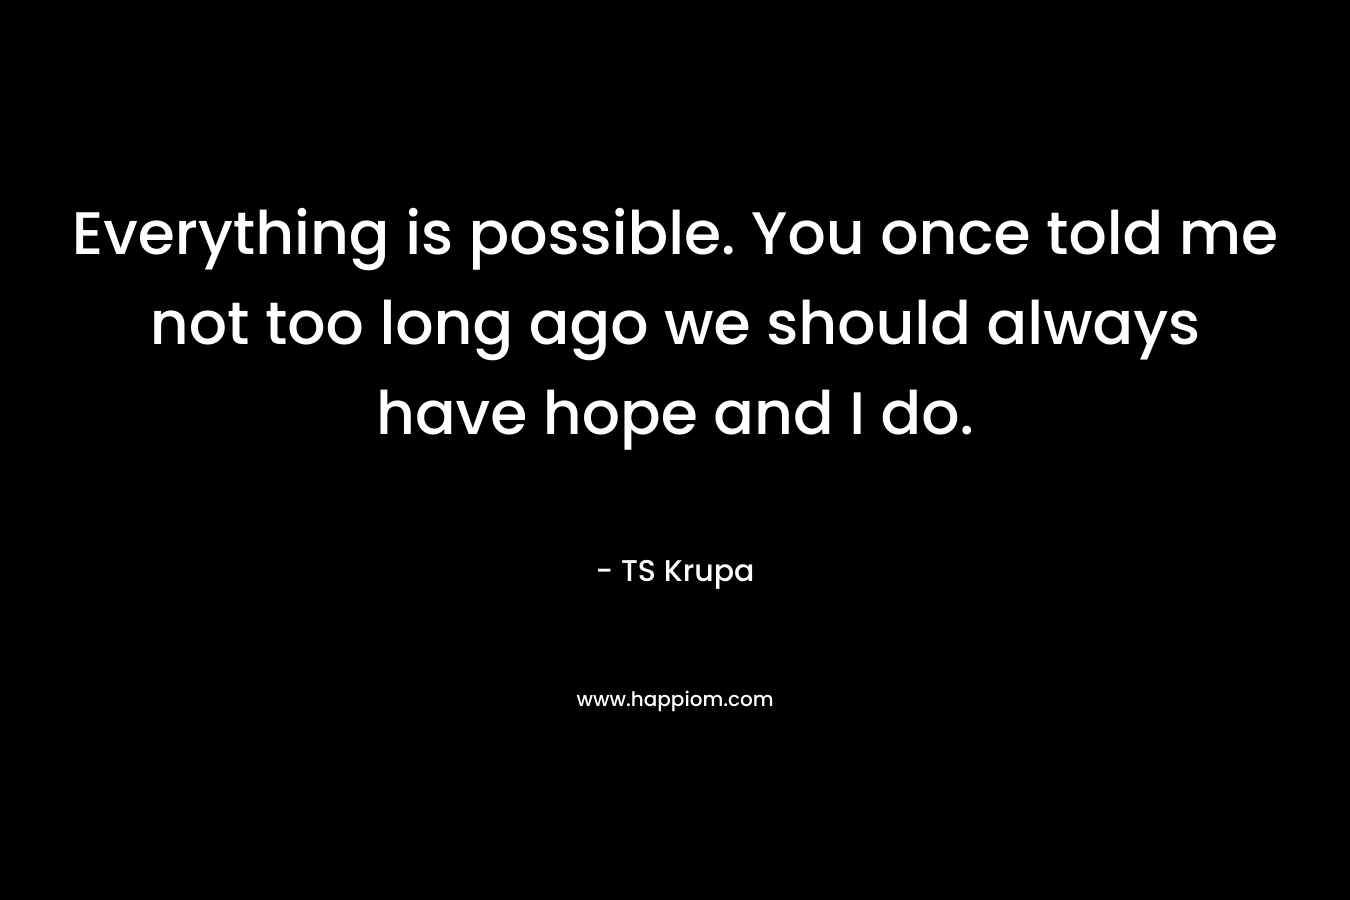 Everything is possible. You once told me not too long ago we should always have hope and I do. – TS Krupa